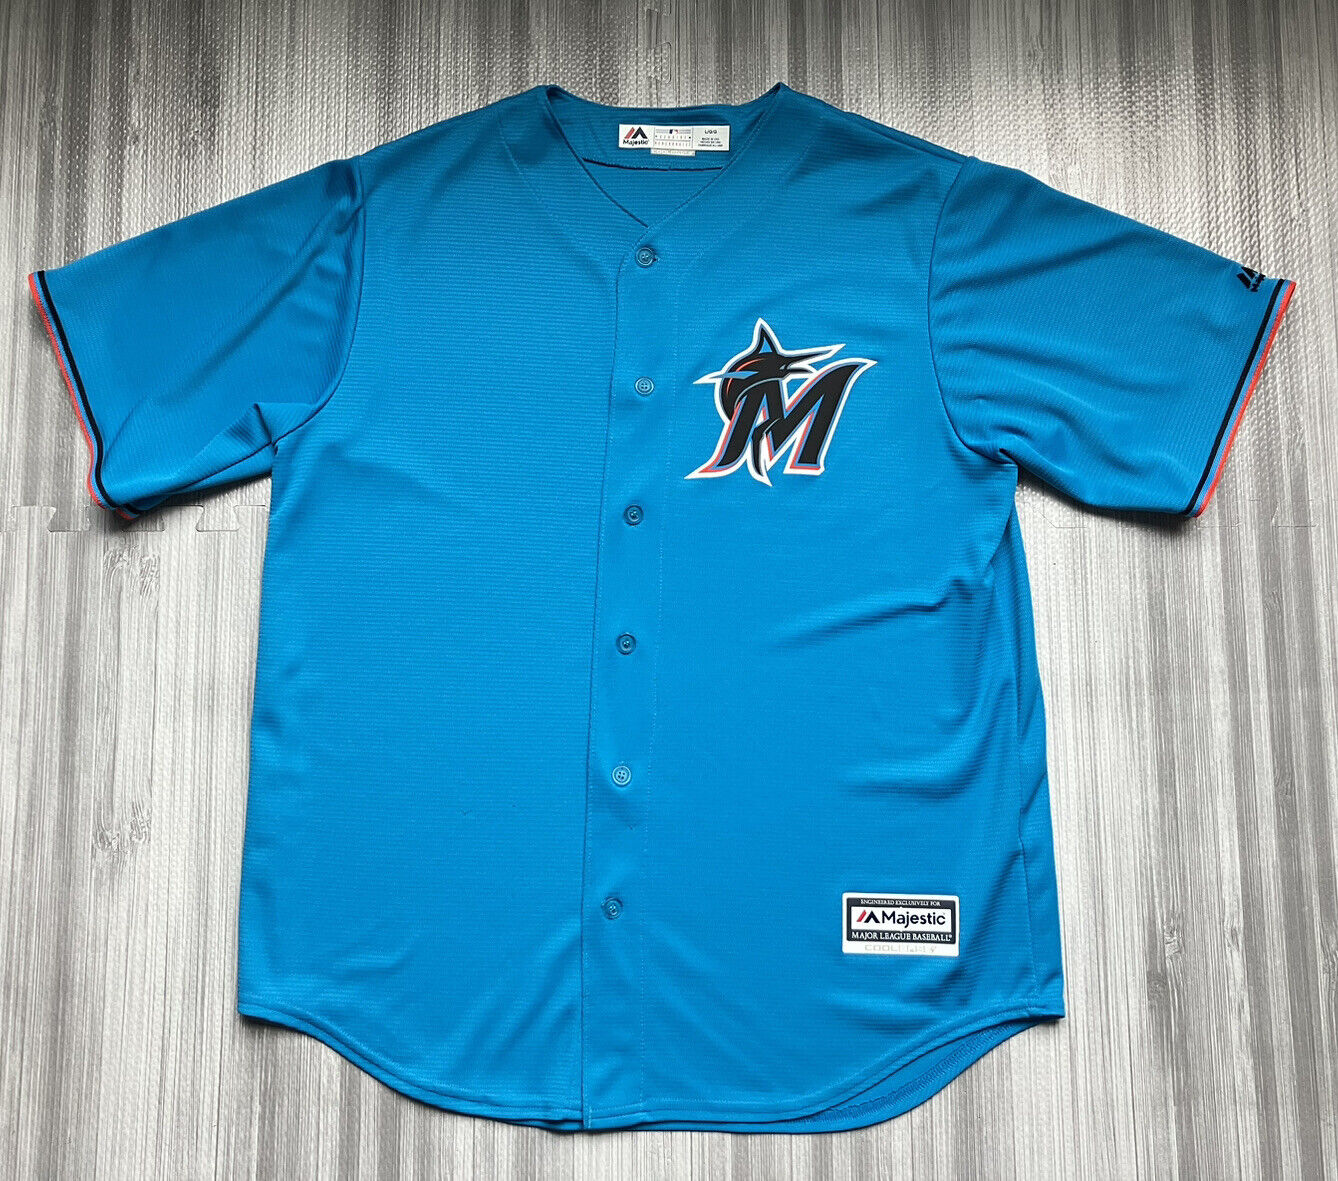 Majestic Miami Marlins Alternate ELECTRIC BLUE Cool Base Jersey Size Large